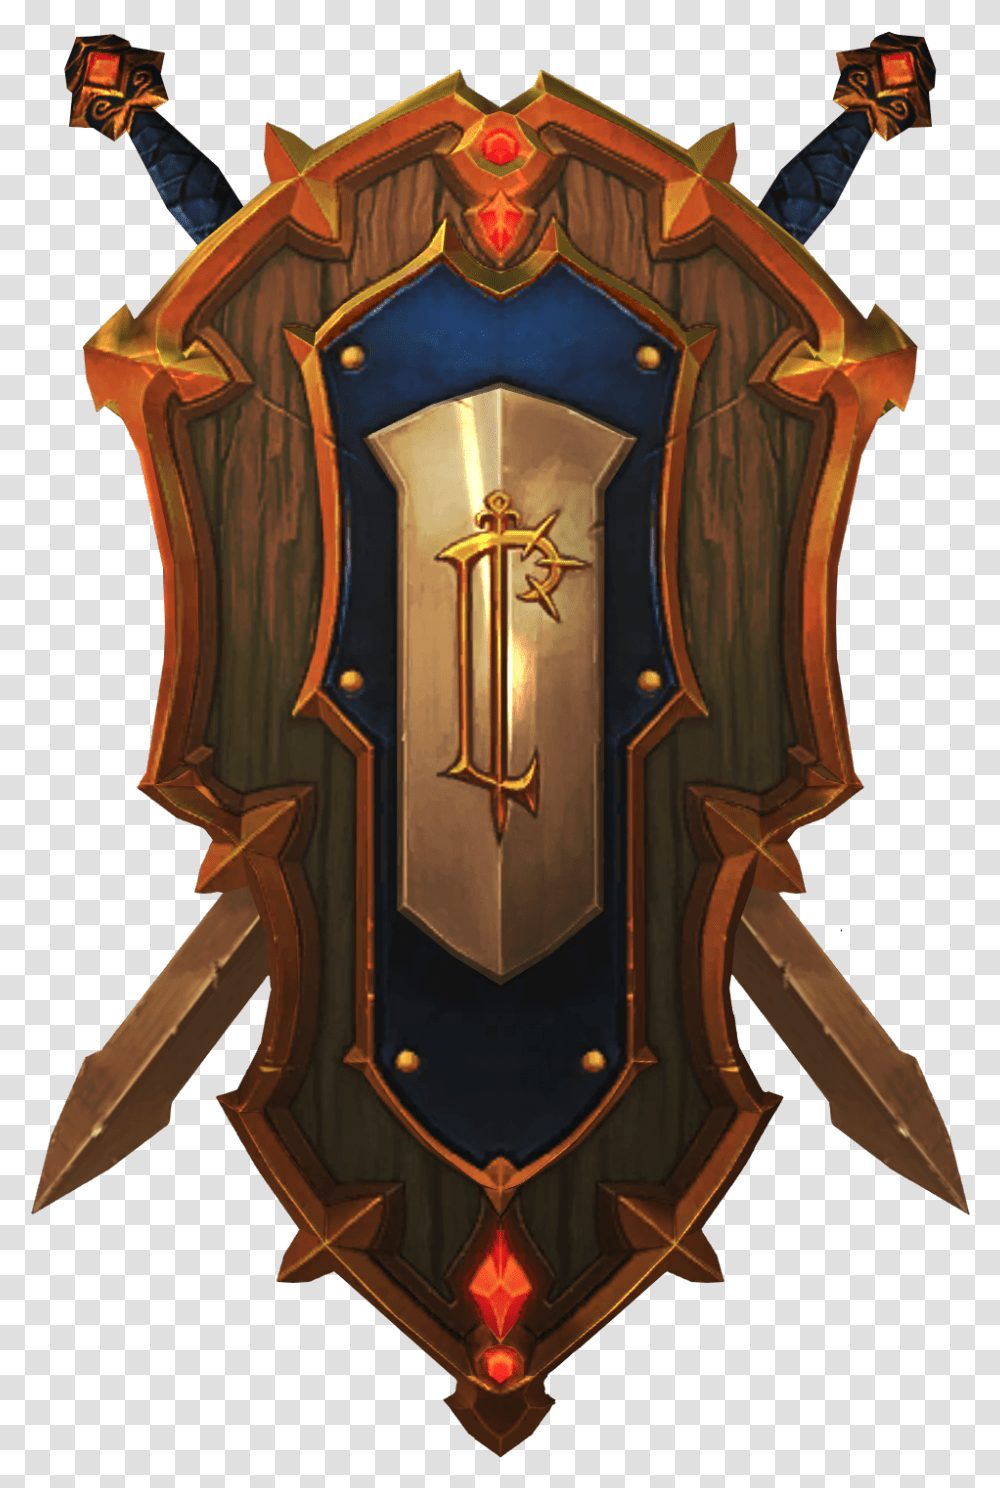 World Of Warcraft Wiki Crest Of Lordaeron, Armor, Shield, Cross Transparent Png